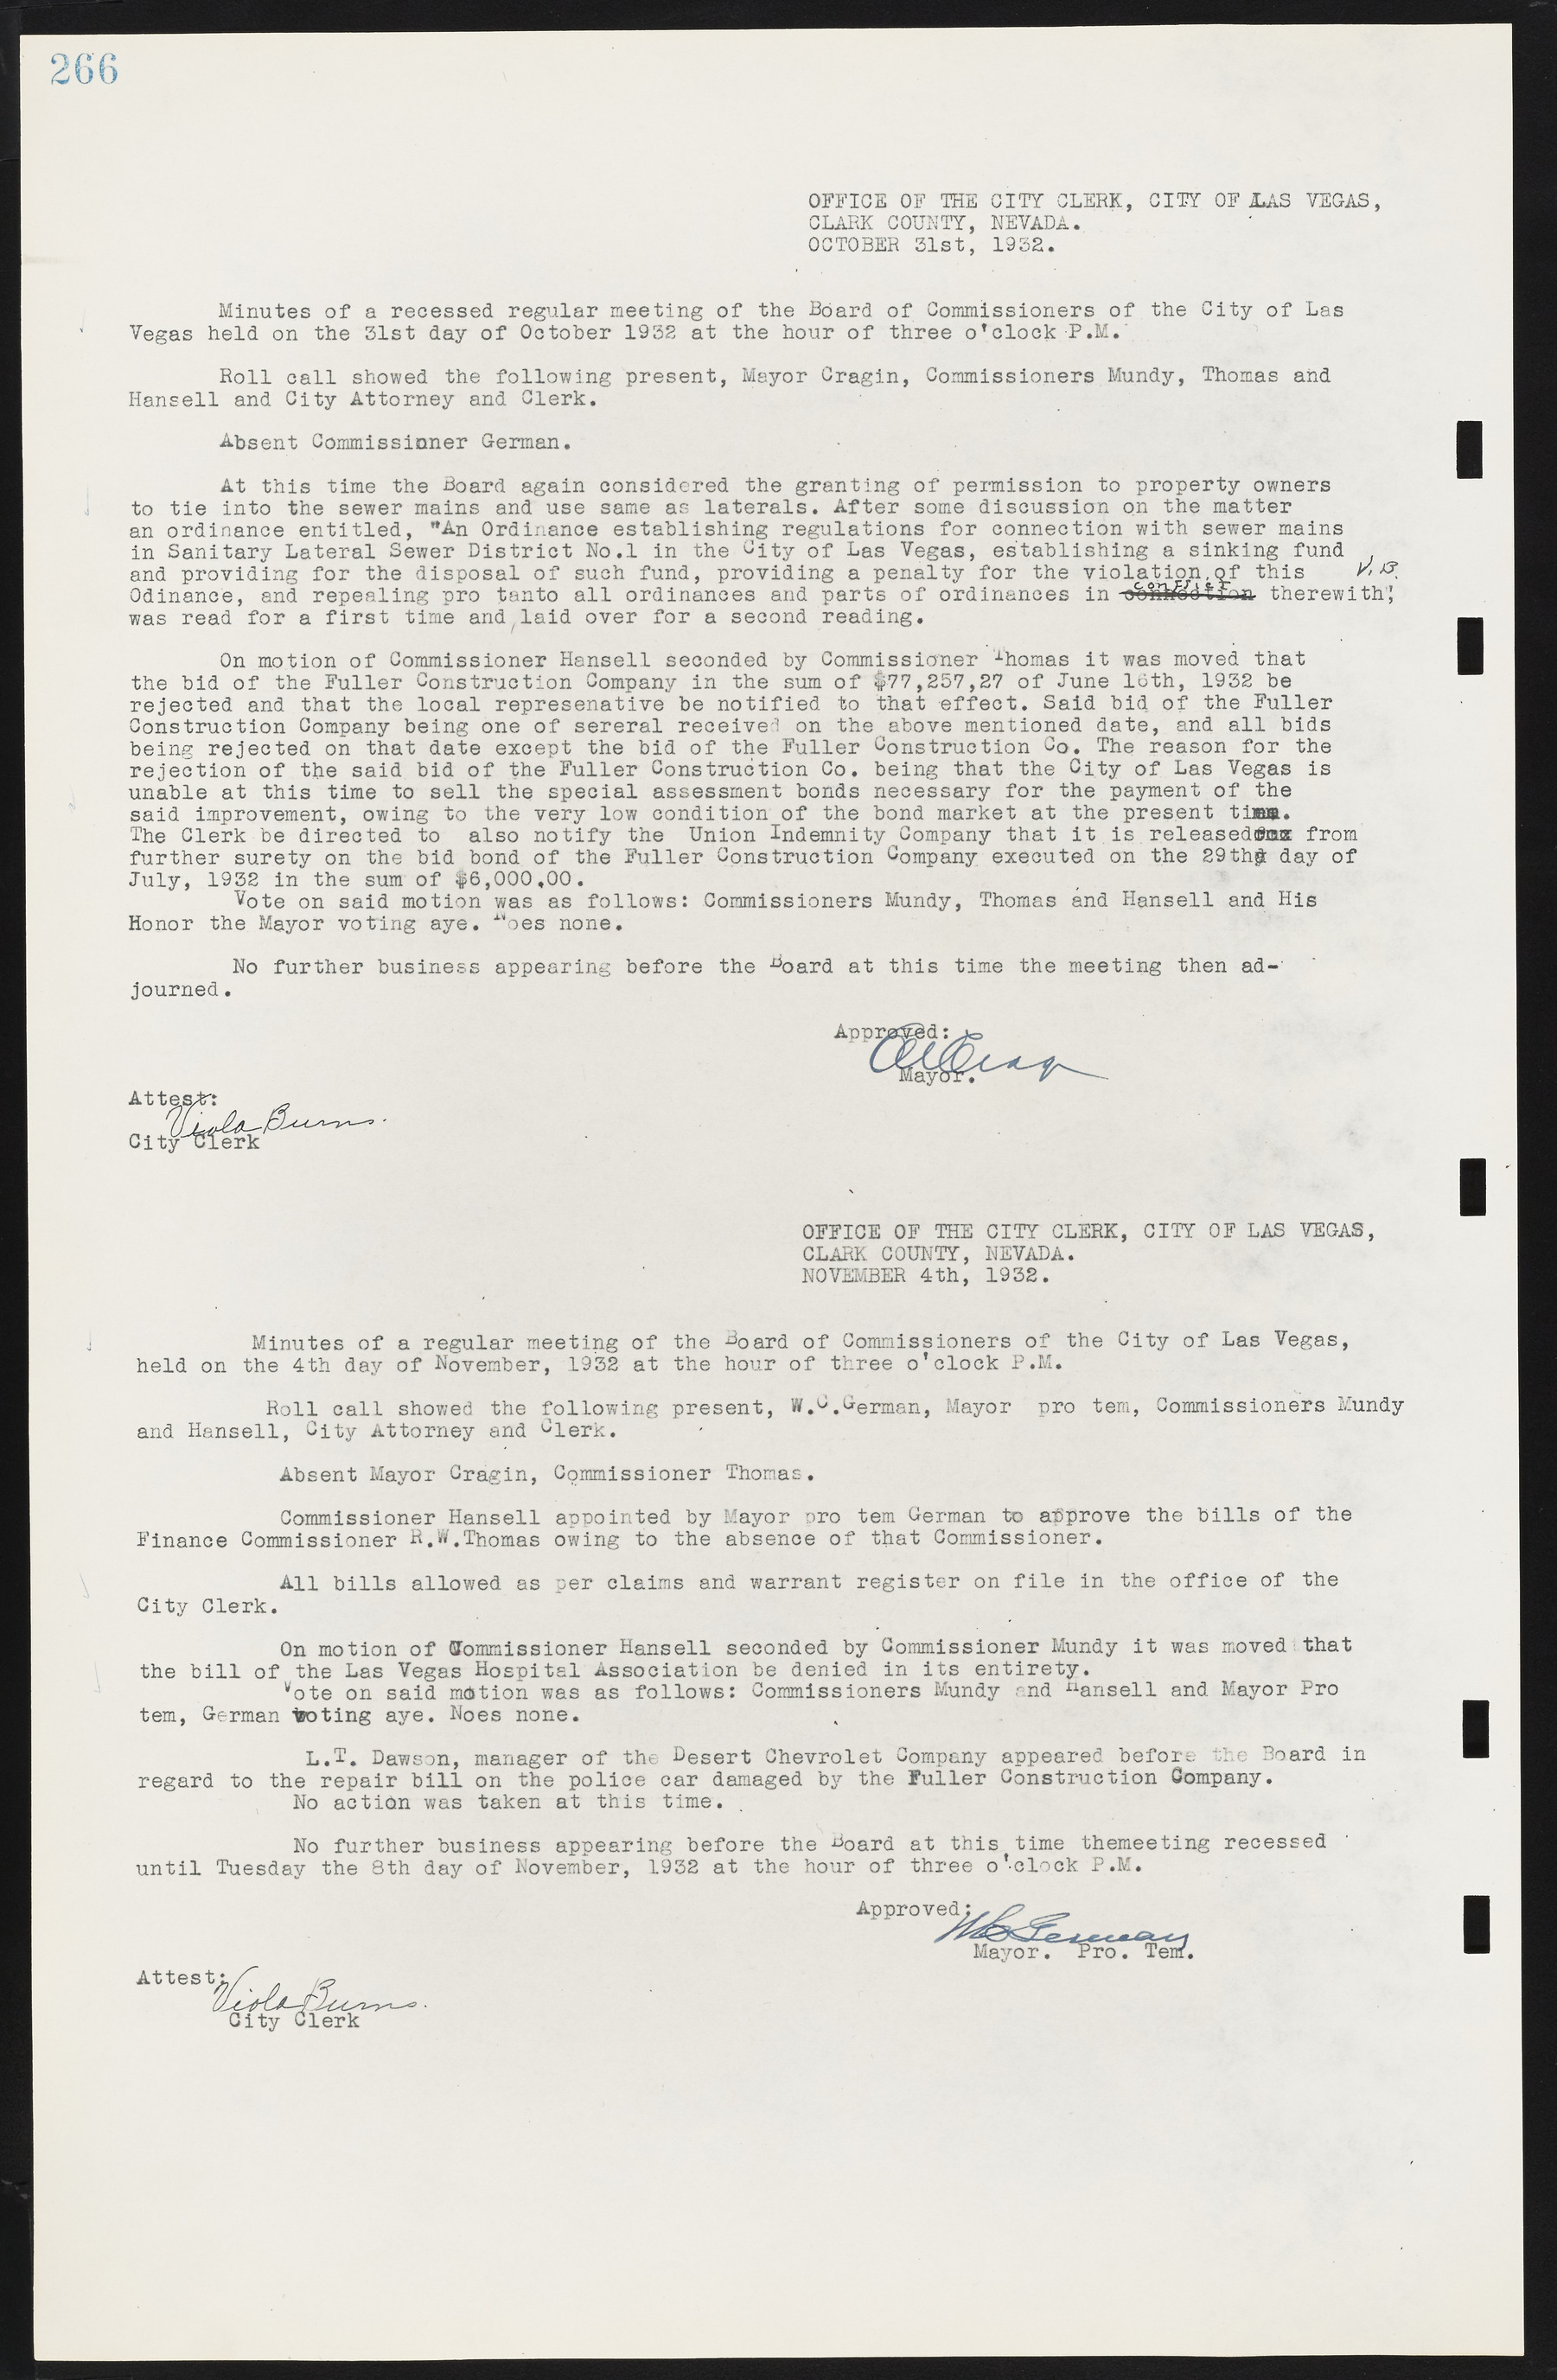 Las Vegas City Commission Minutes, May 14, 1929 to February 11, 1937, lvc000003-272